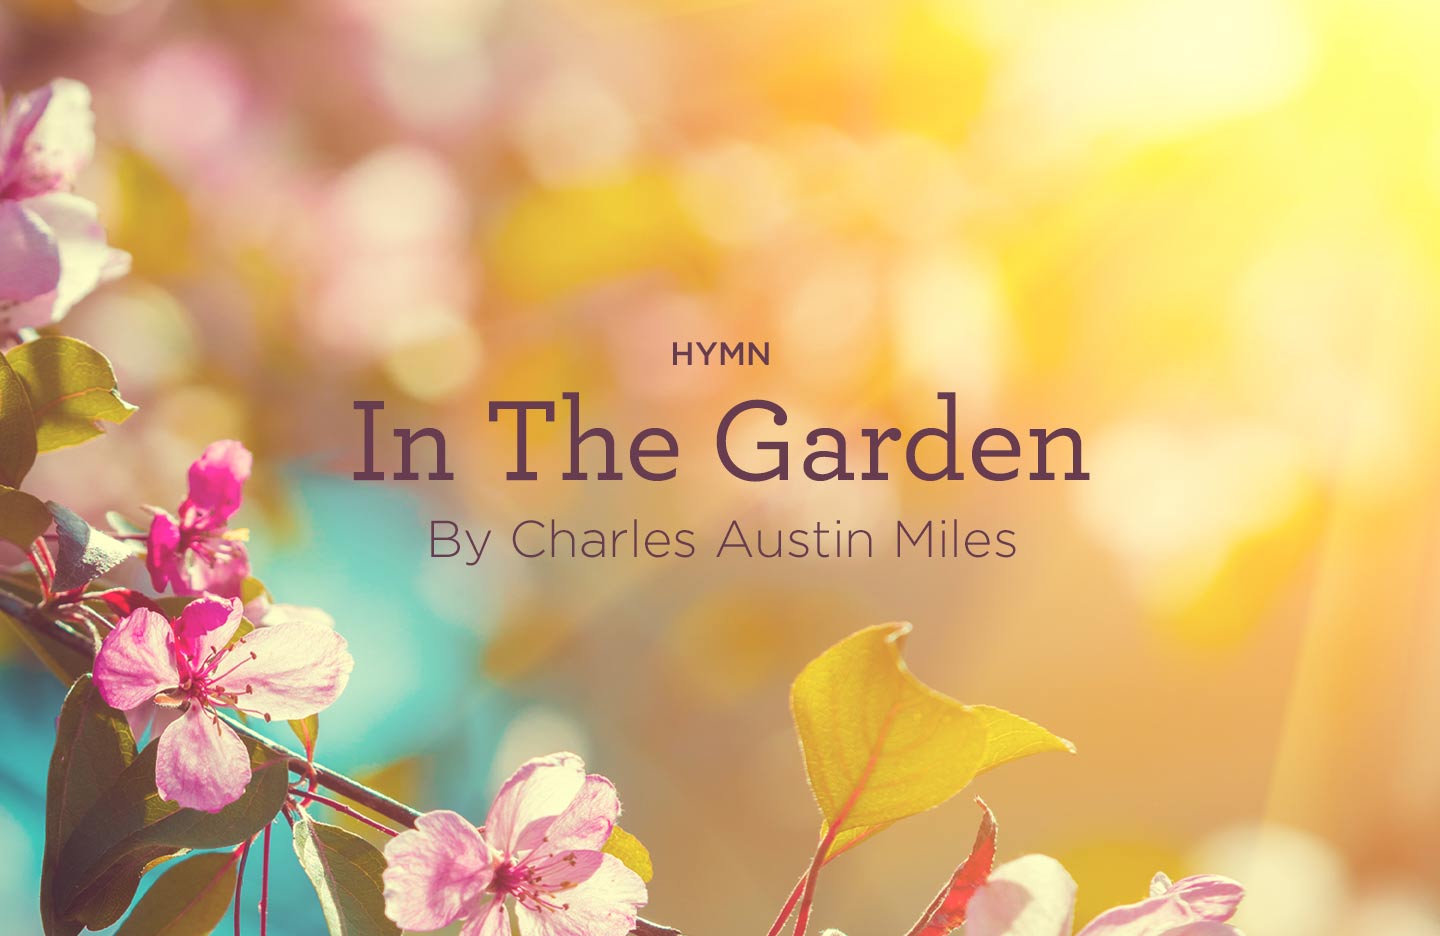 Hymn In The Garden By Charles Austin Miles